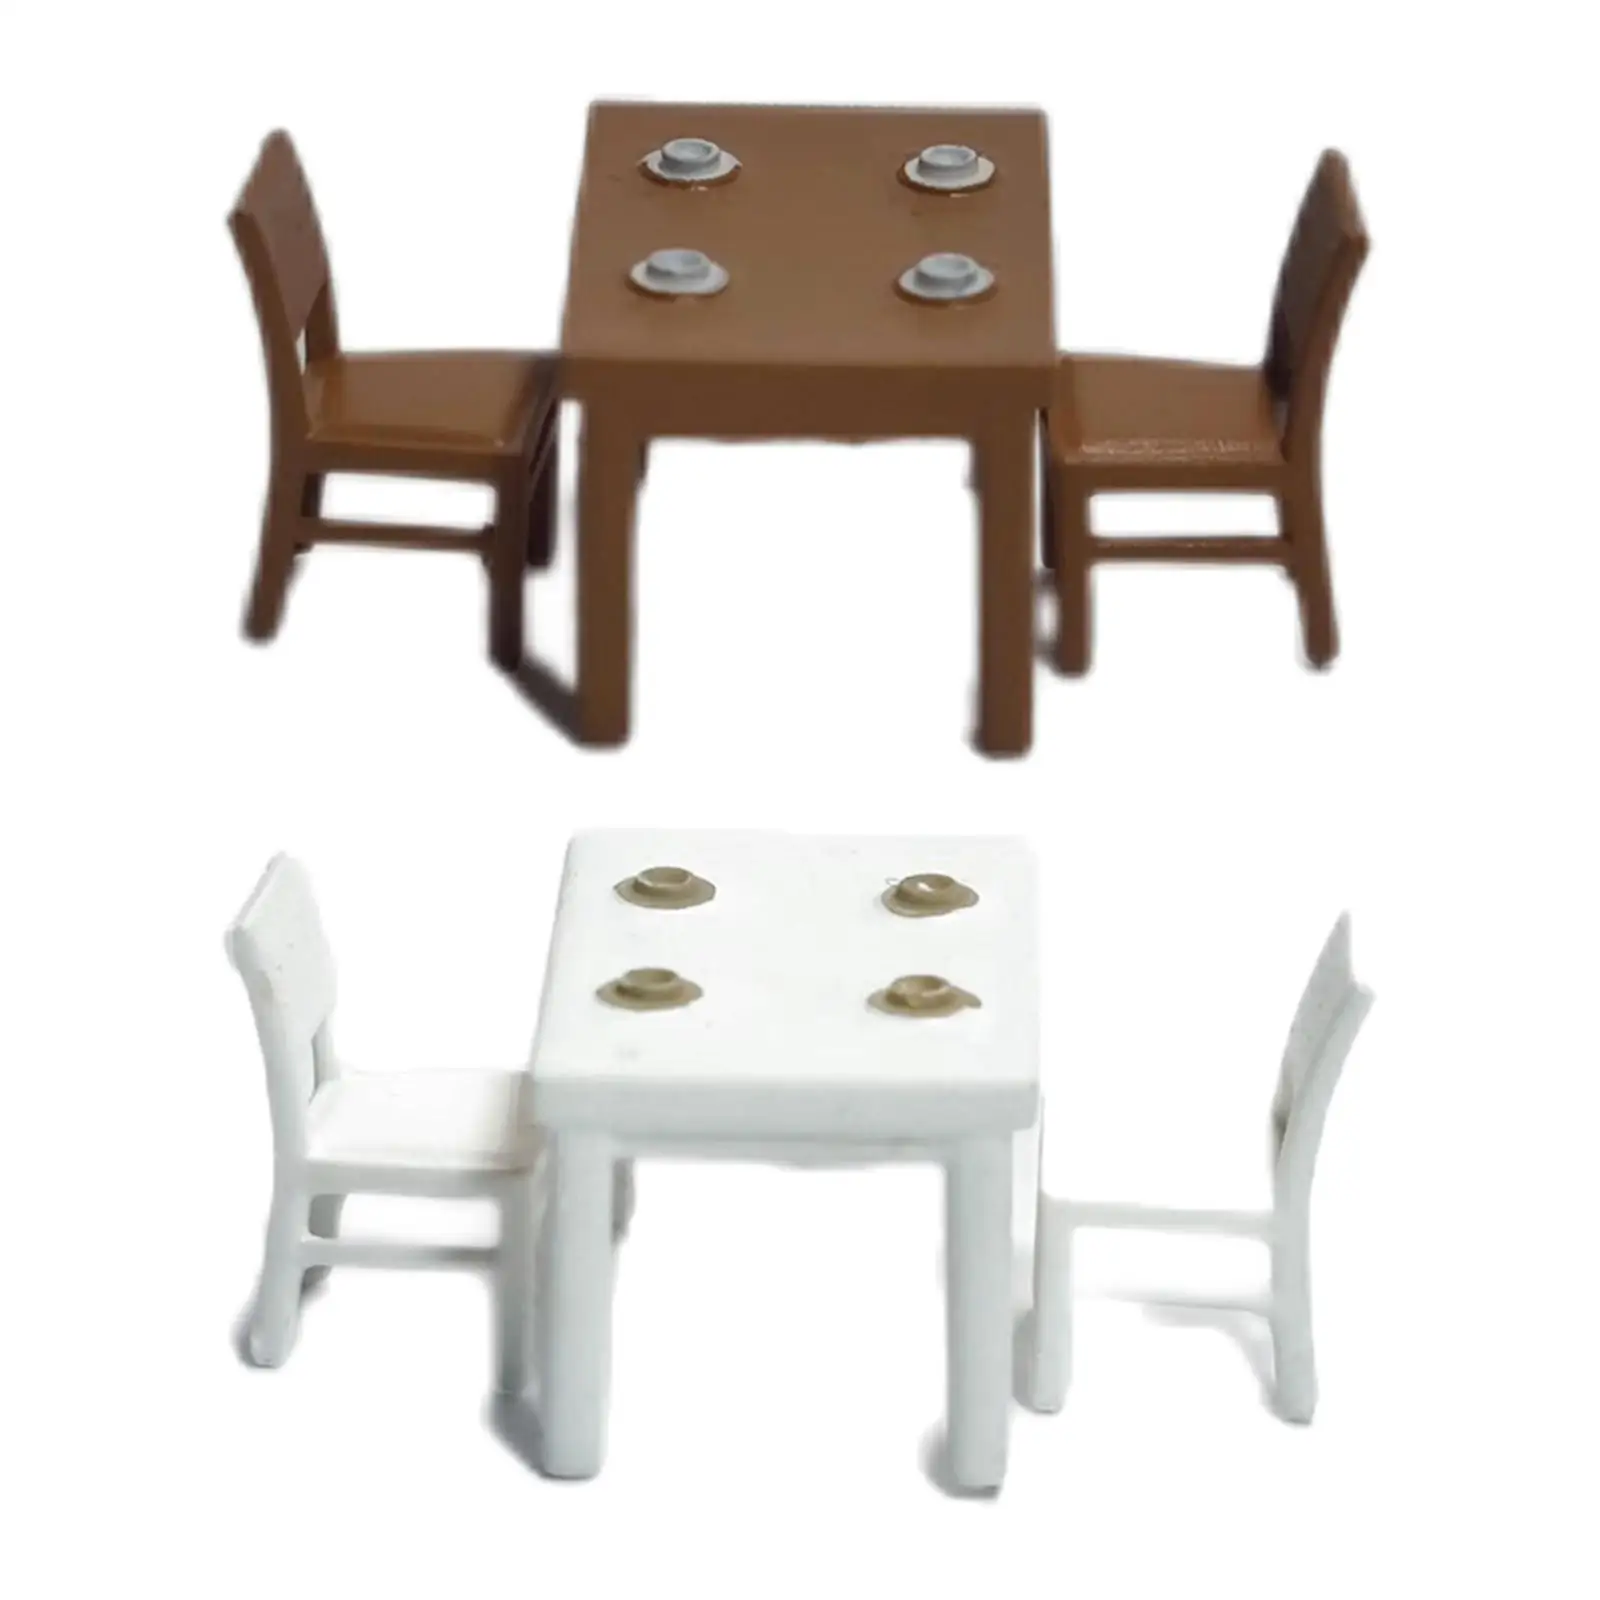 3 Pieces 1:64 Furniture Model Collections Miniature Dollhouse Accessories